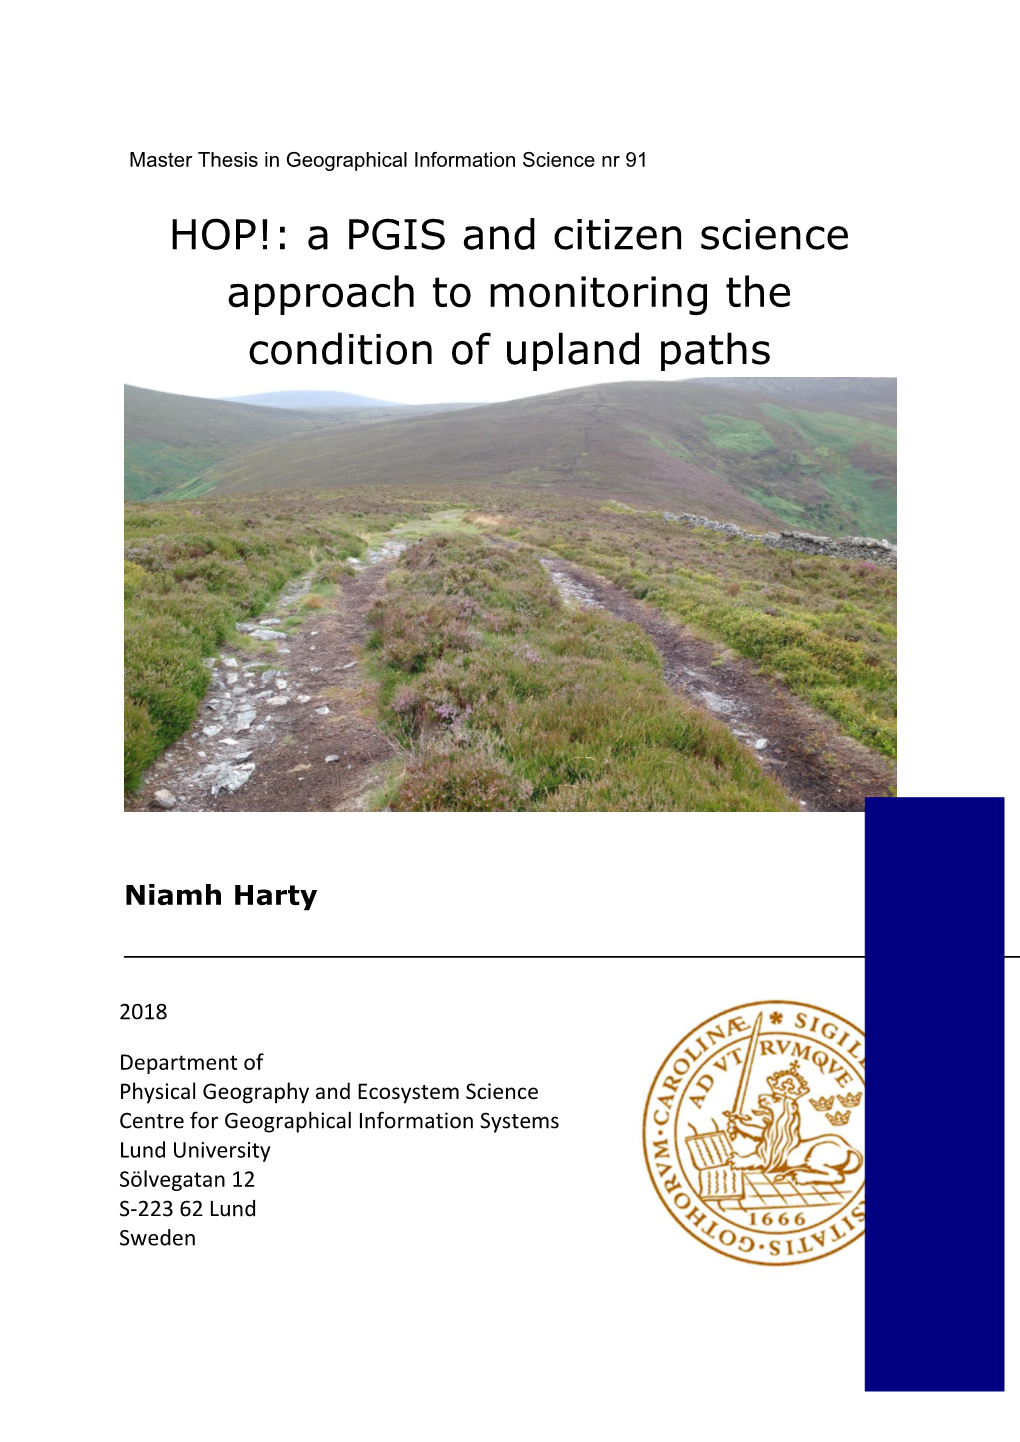 A PGIS and Citizen Science Approach to Monitoring the Condition of Upland Paths